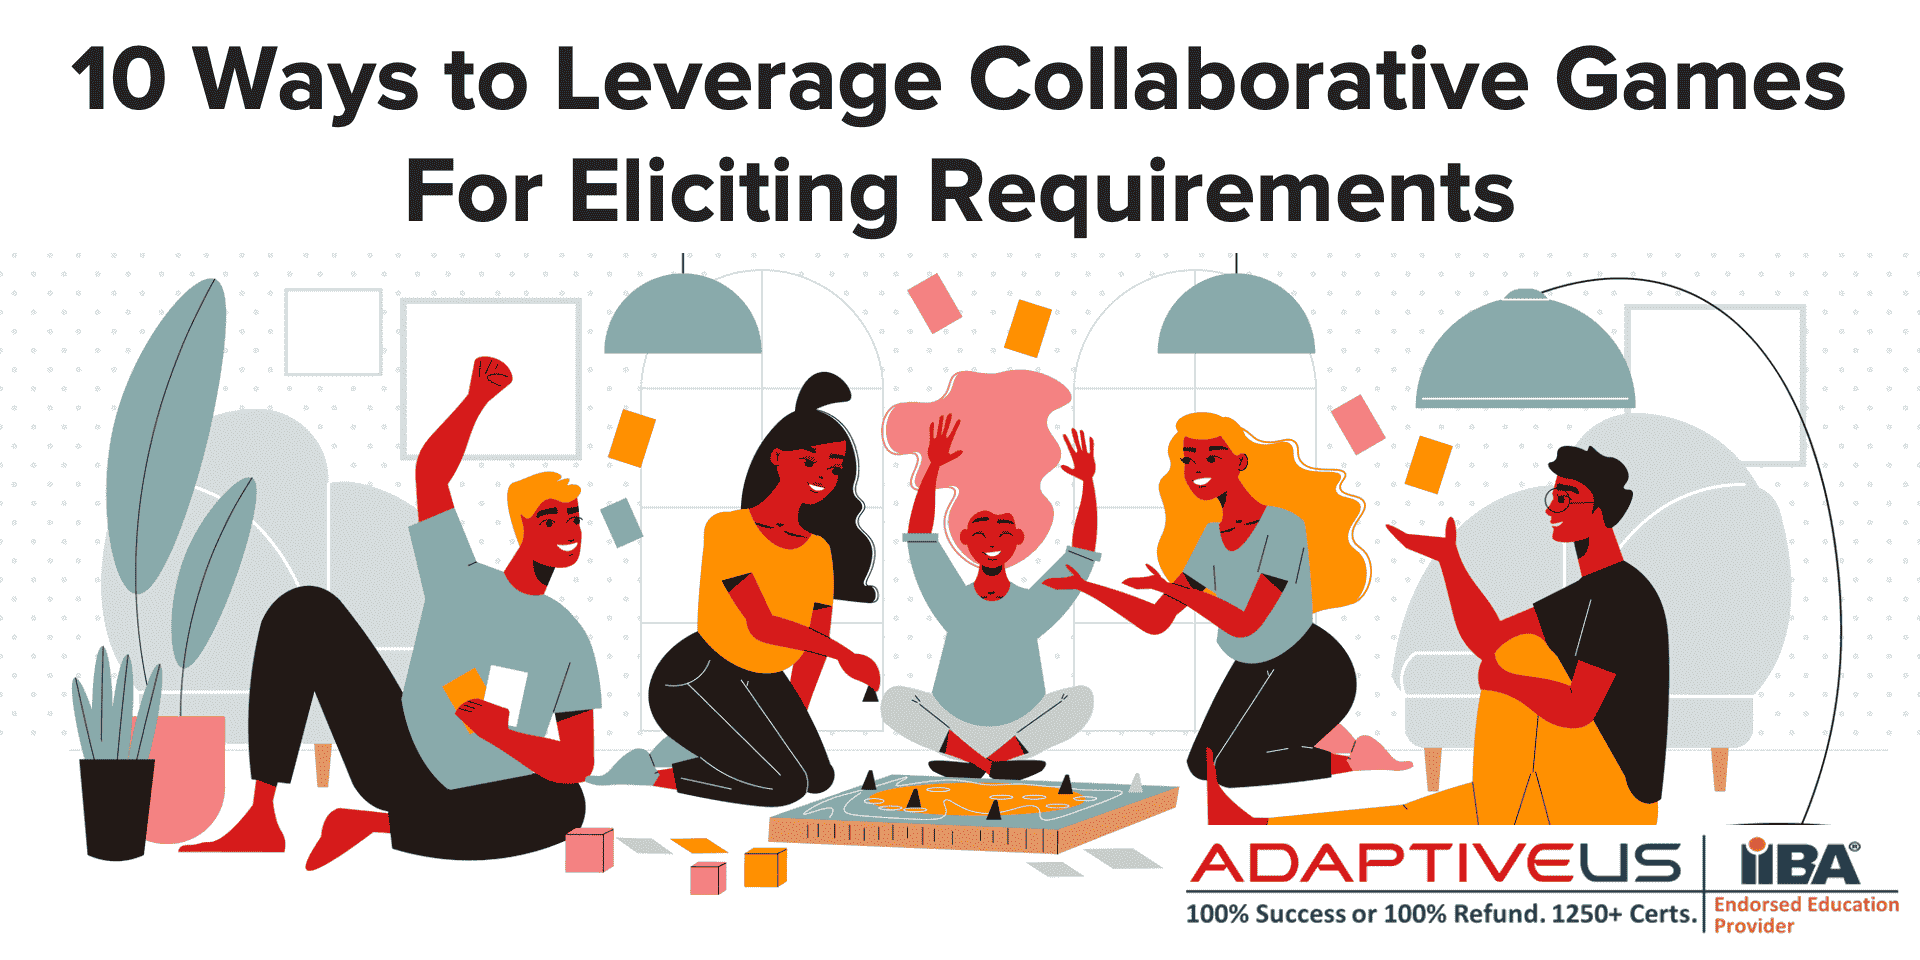 10 Ways to Leverage Collaborative Games For Eliciting Requirements